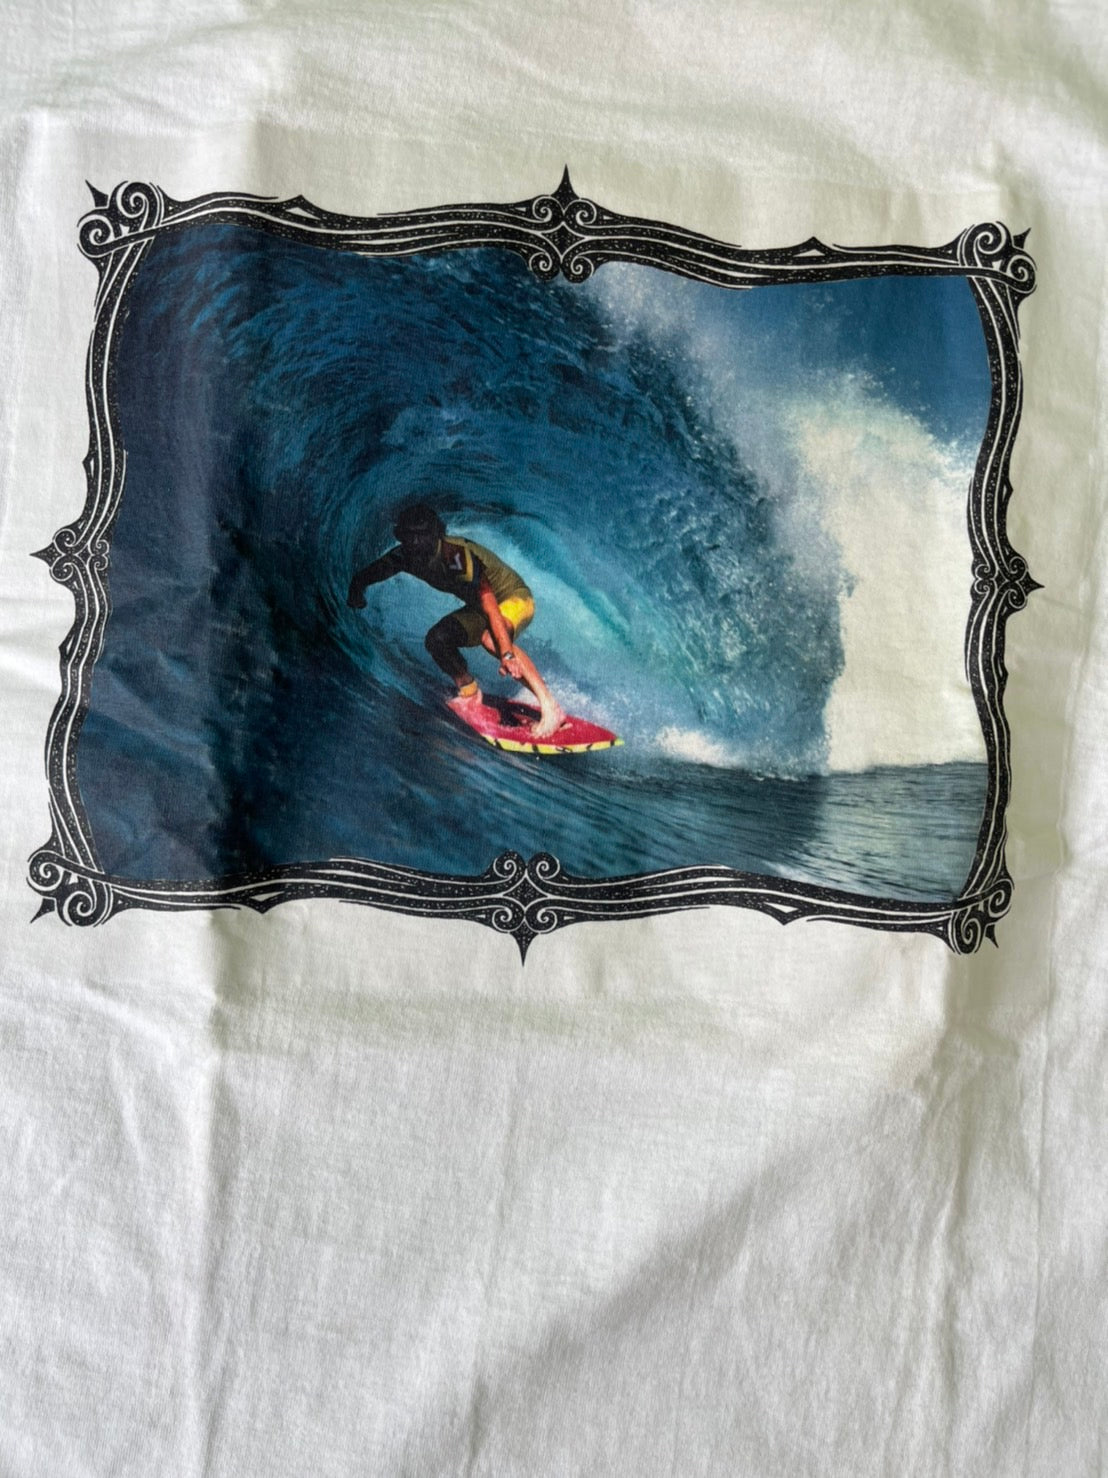 vintage】90's Aaron Chang Surfing Photo Graphic T-shirt Made in ...